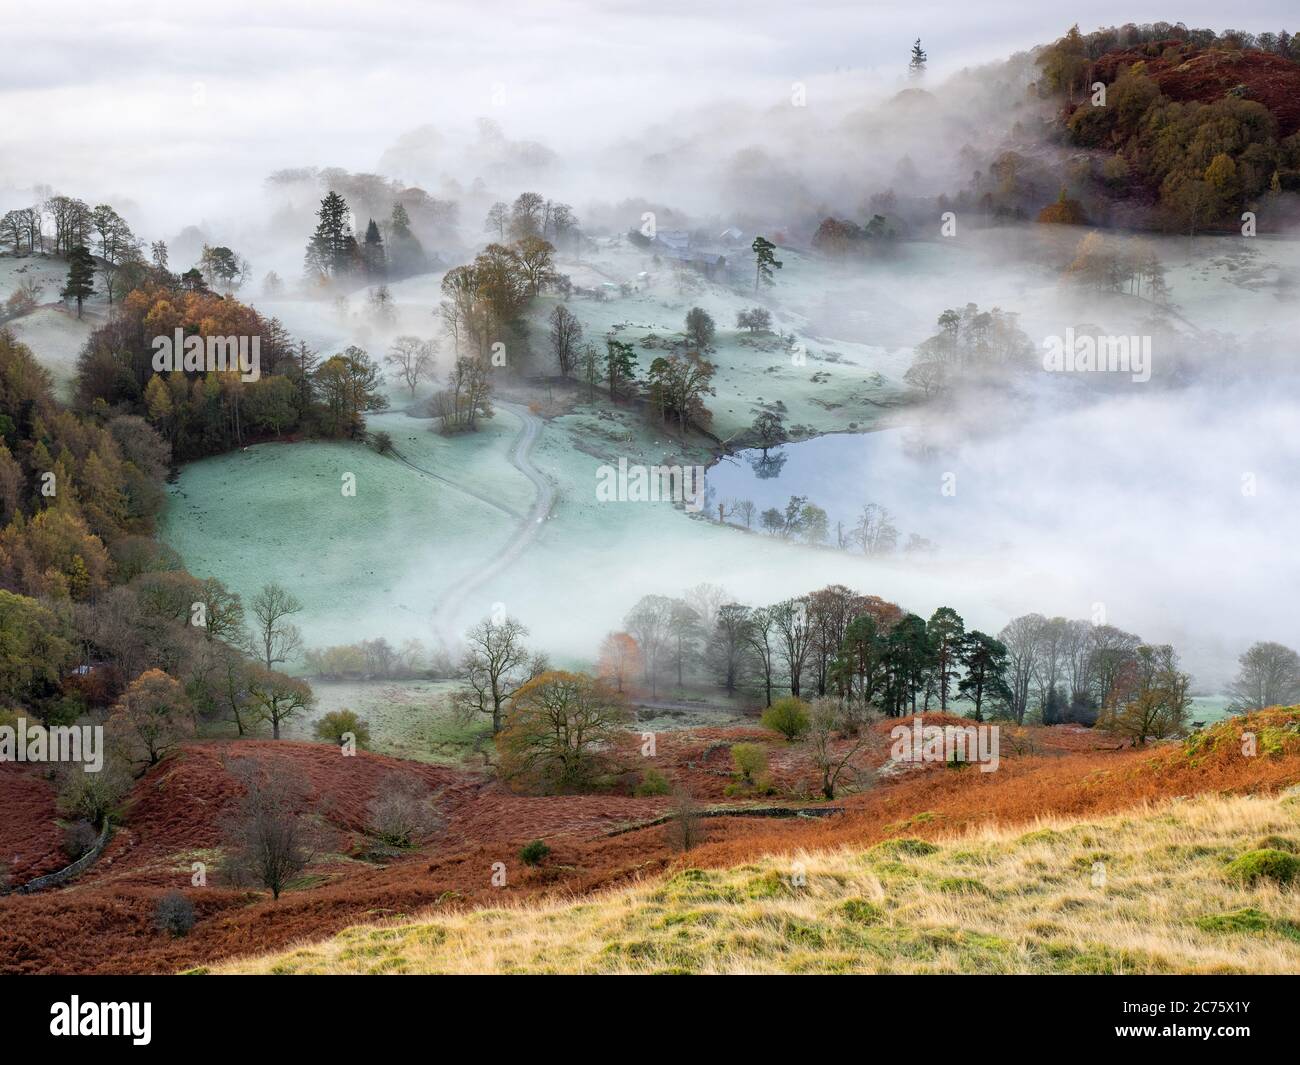 A layer of mist envelopes the frosty land around Loughrigg Tarn on a chilly autumn morning in the English Lake District, moments before sunrise. Stock Photo